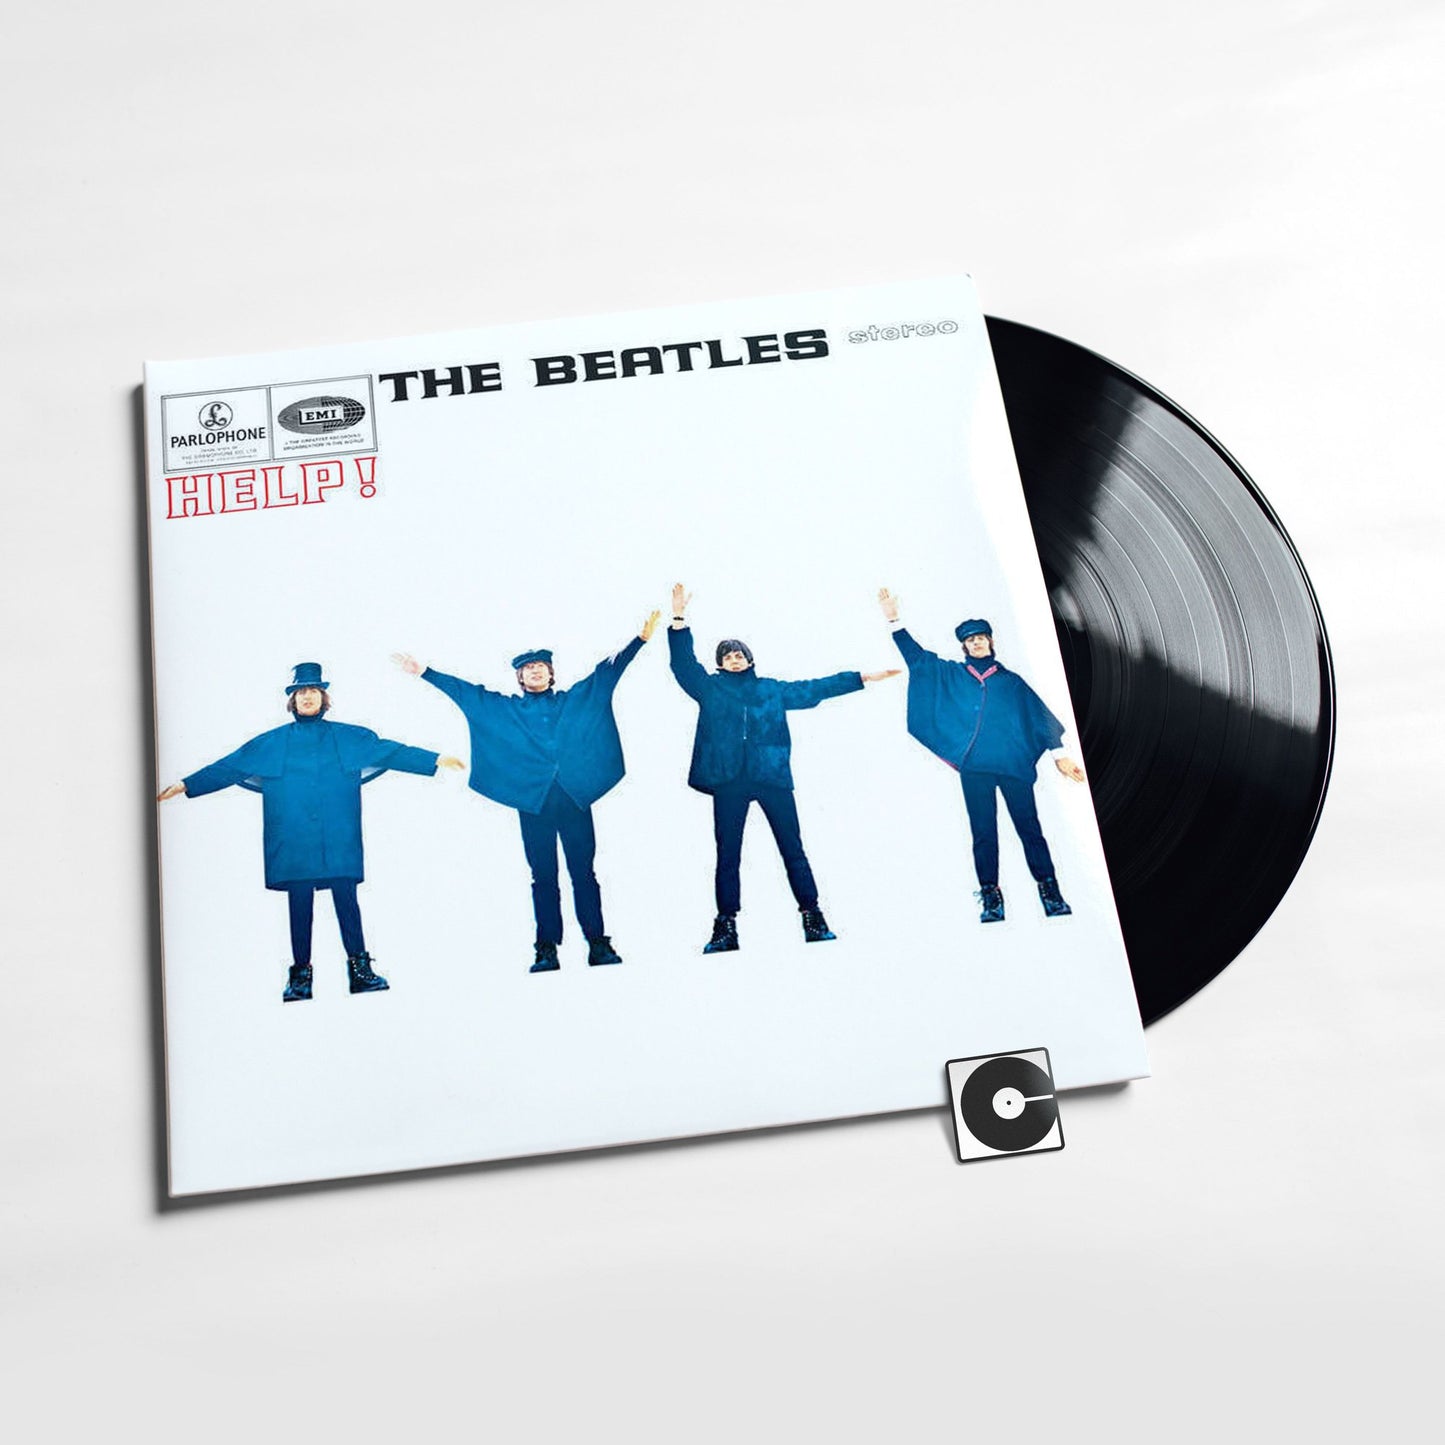 The Beatles - "Help" Stereo